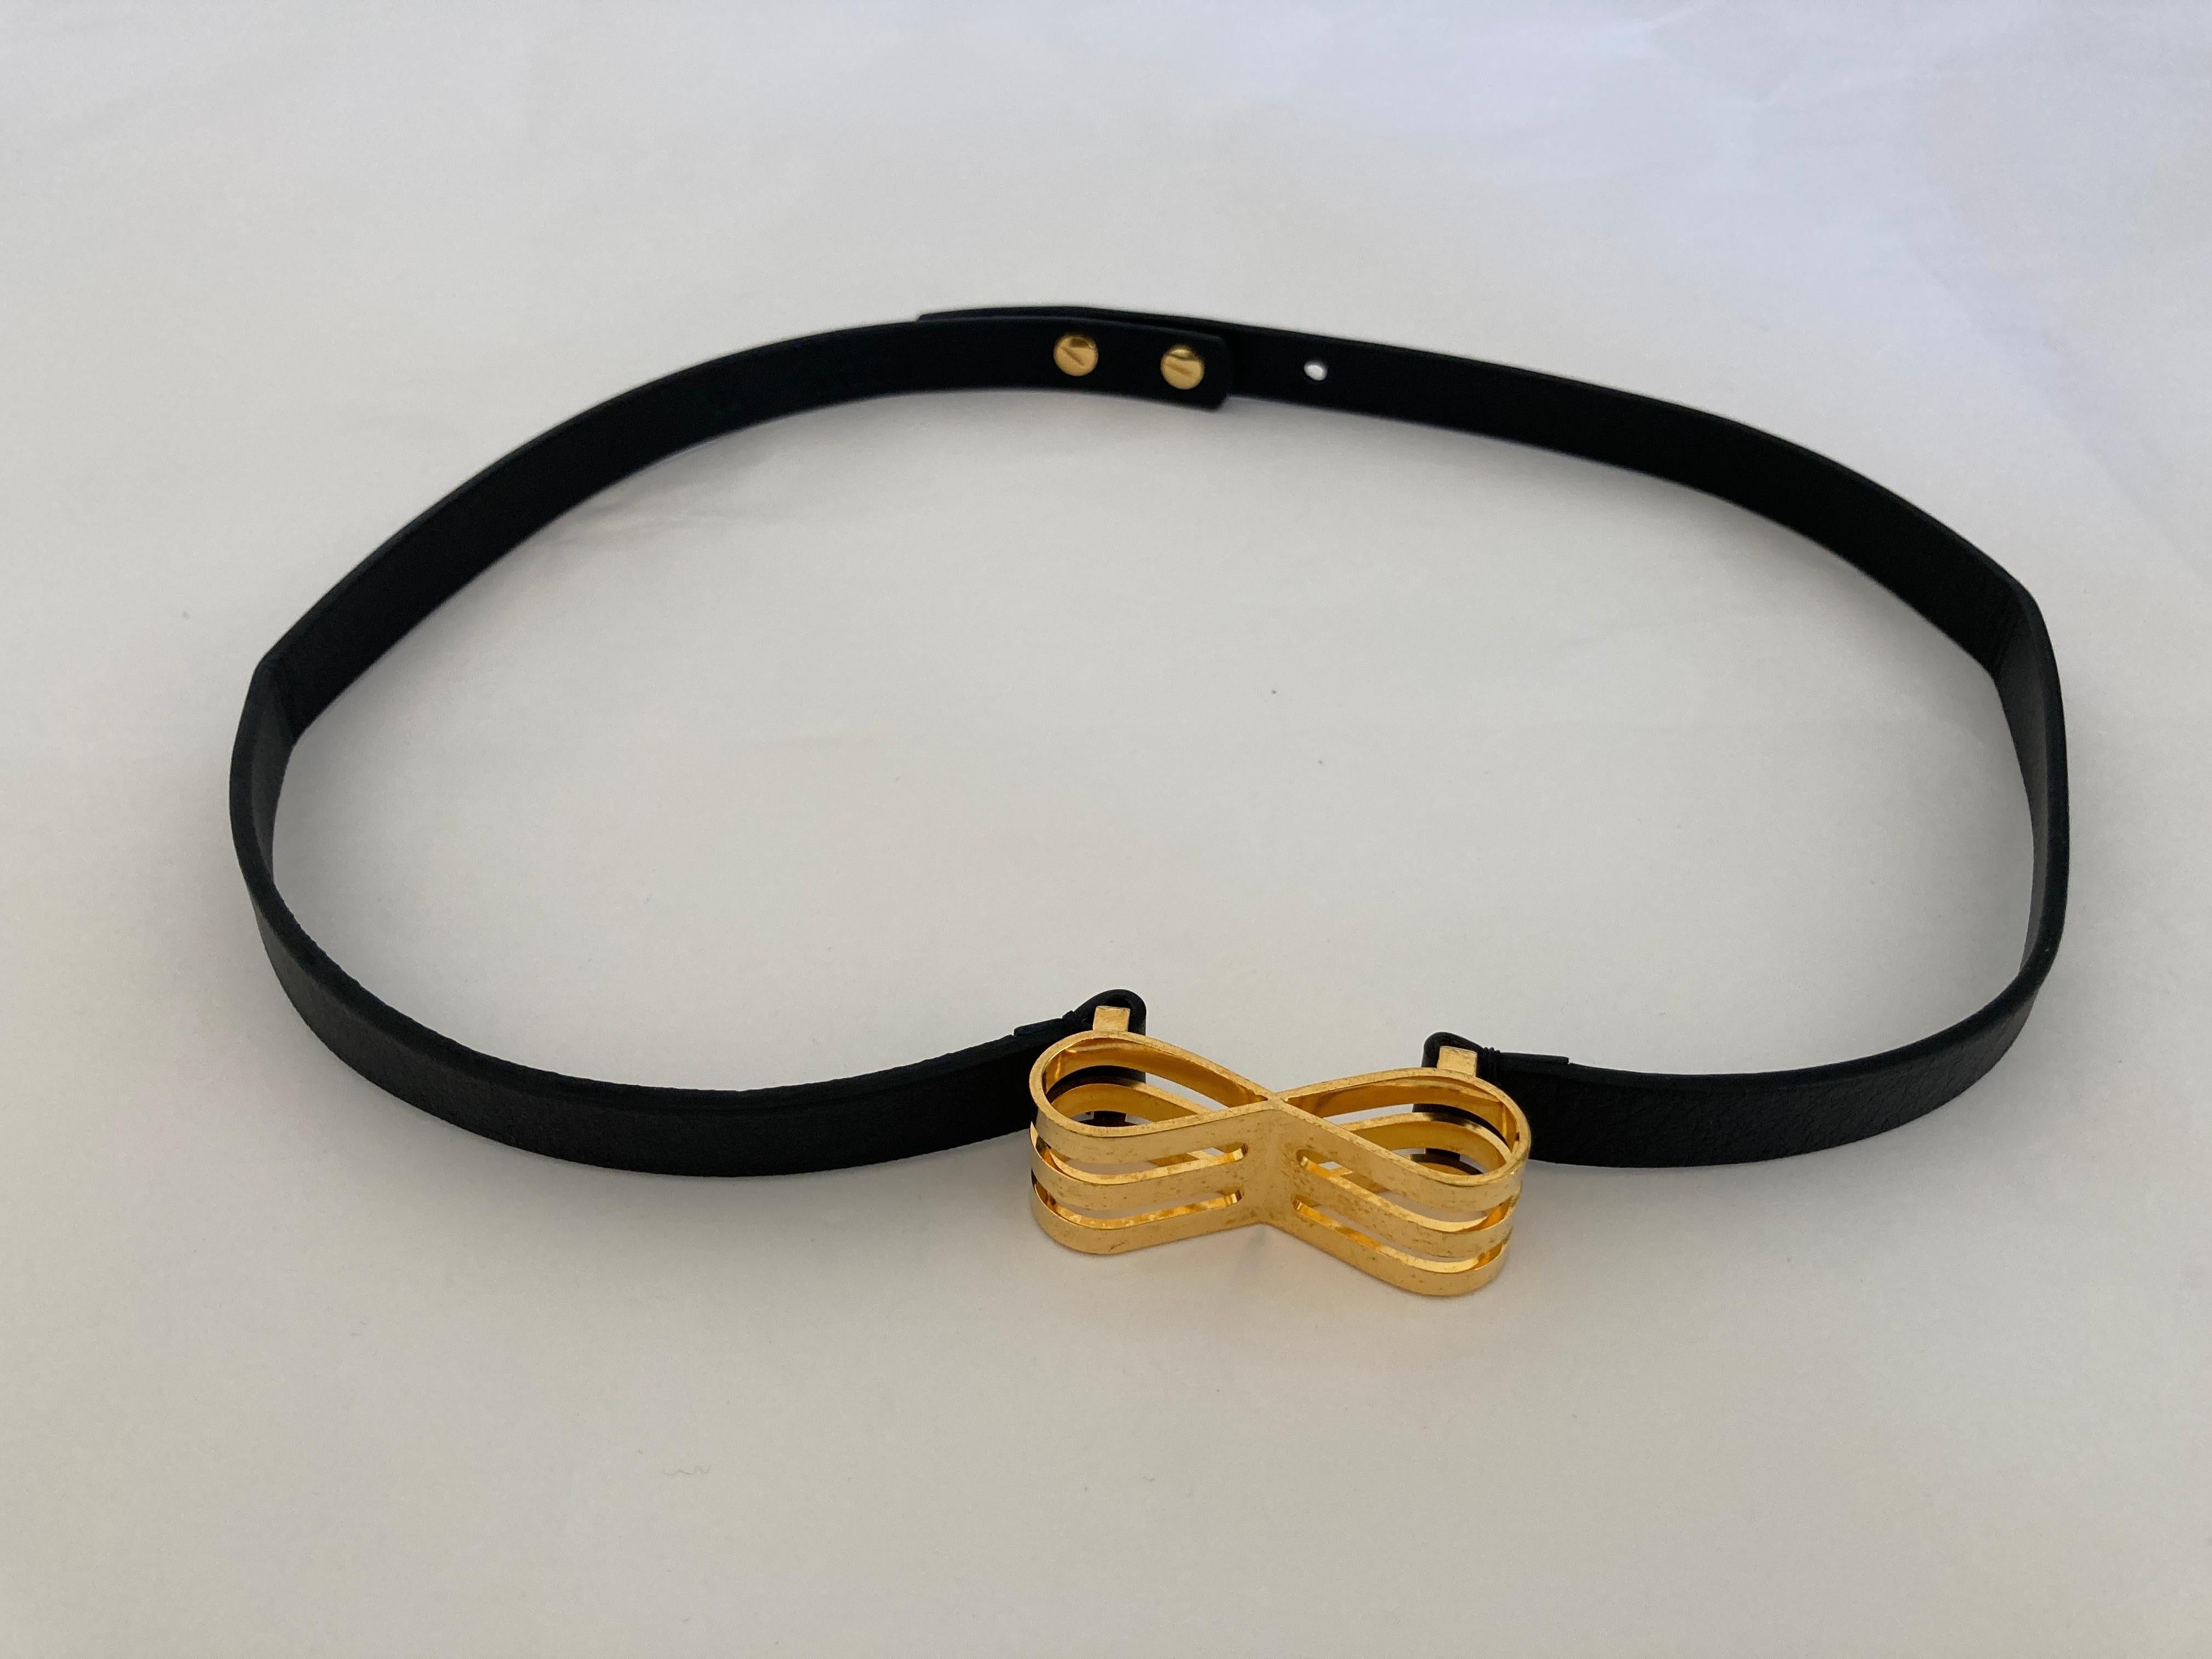 Marni Black Leather Waist Belt with Gold Metal Bow In Good Condition For Sale In North Hollywood, CA